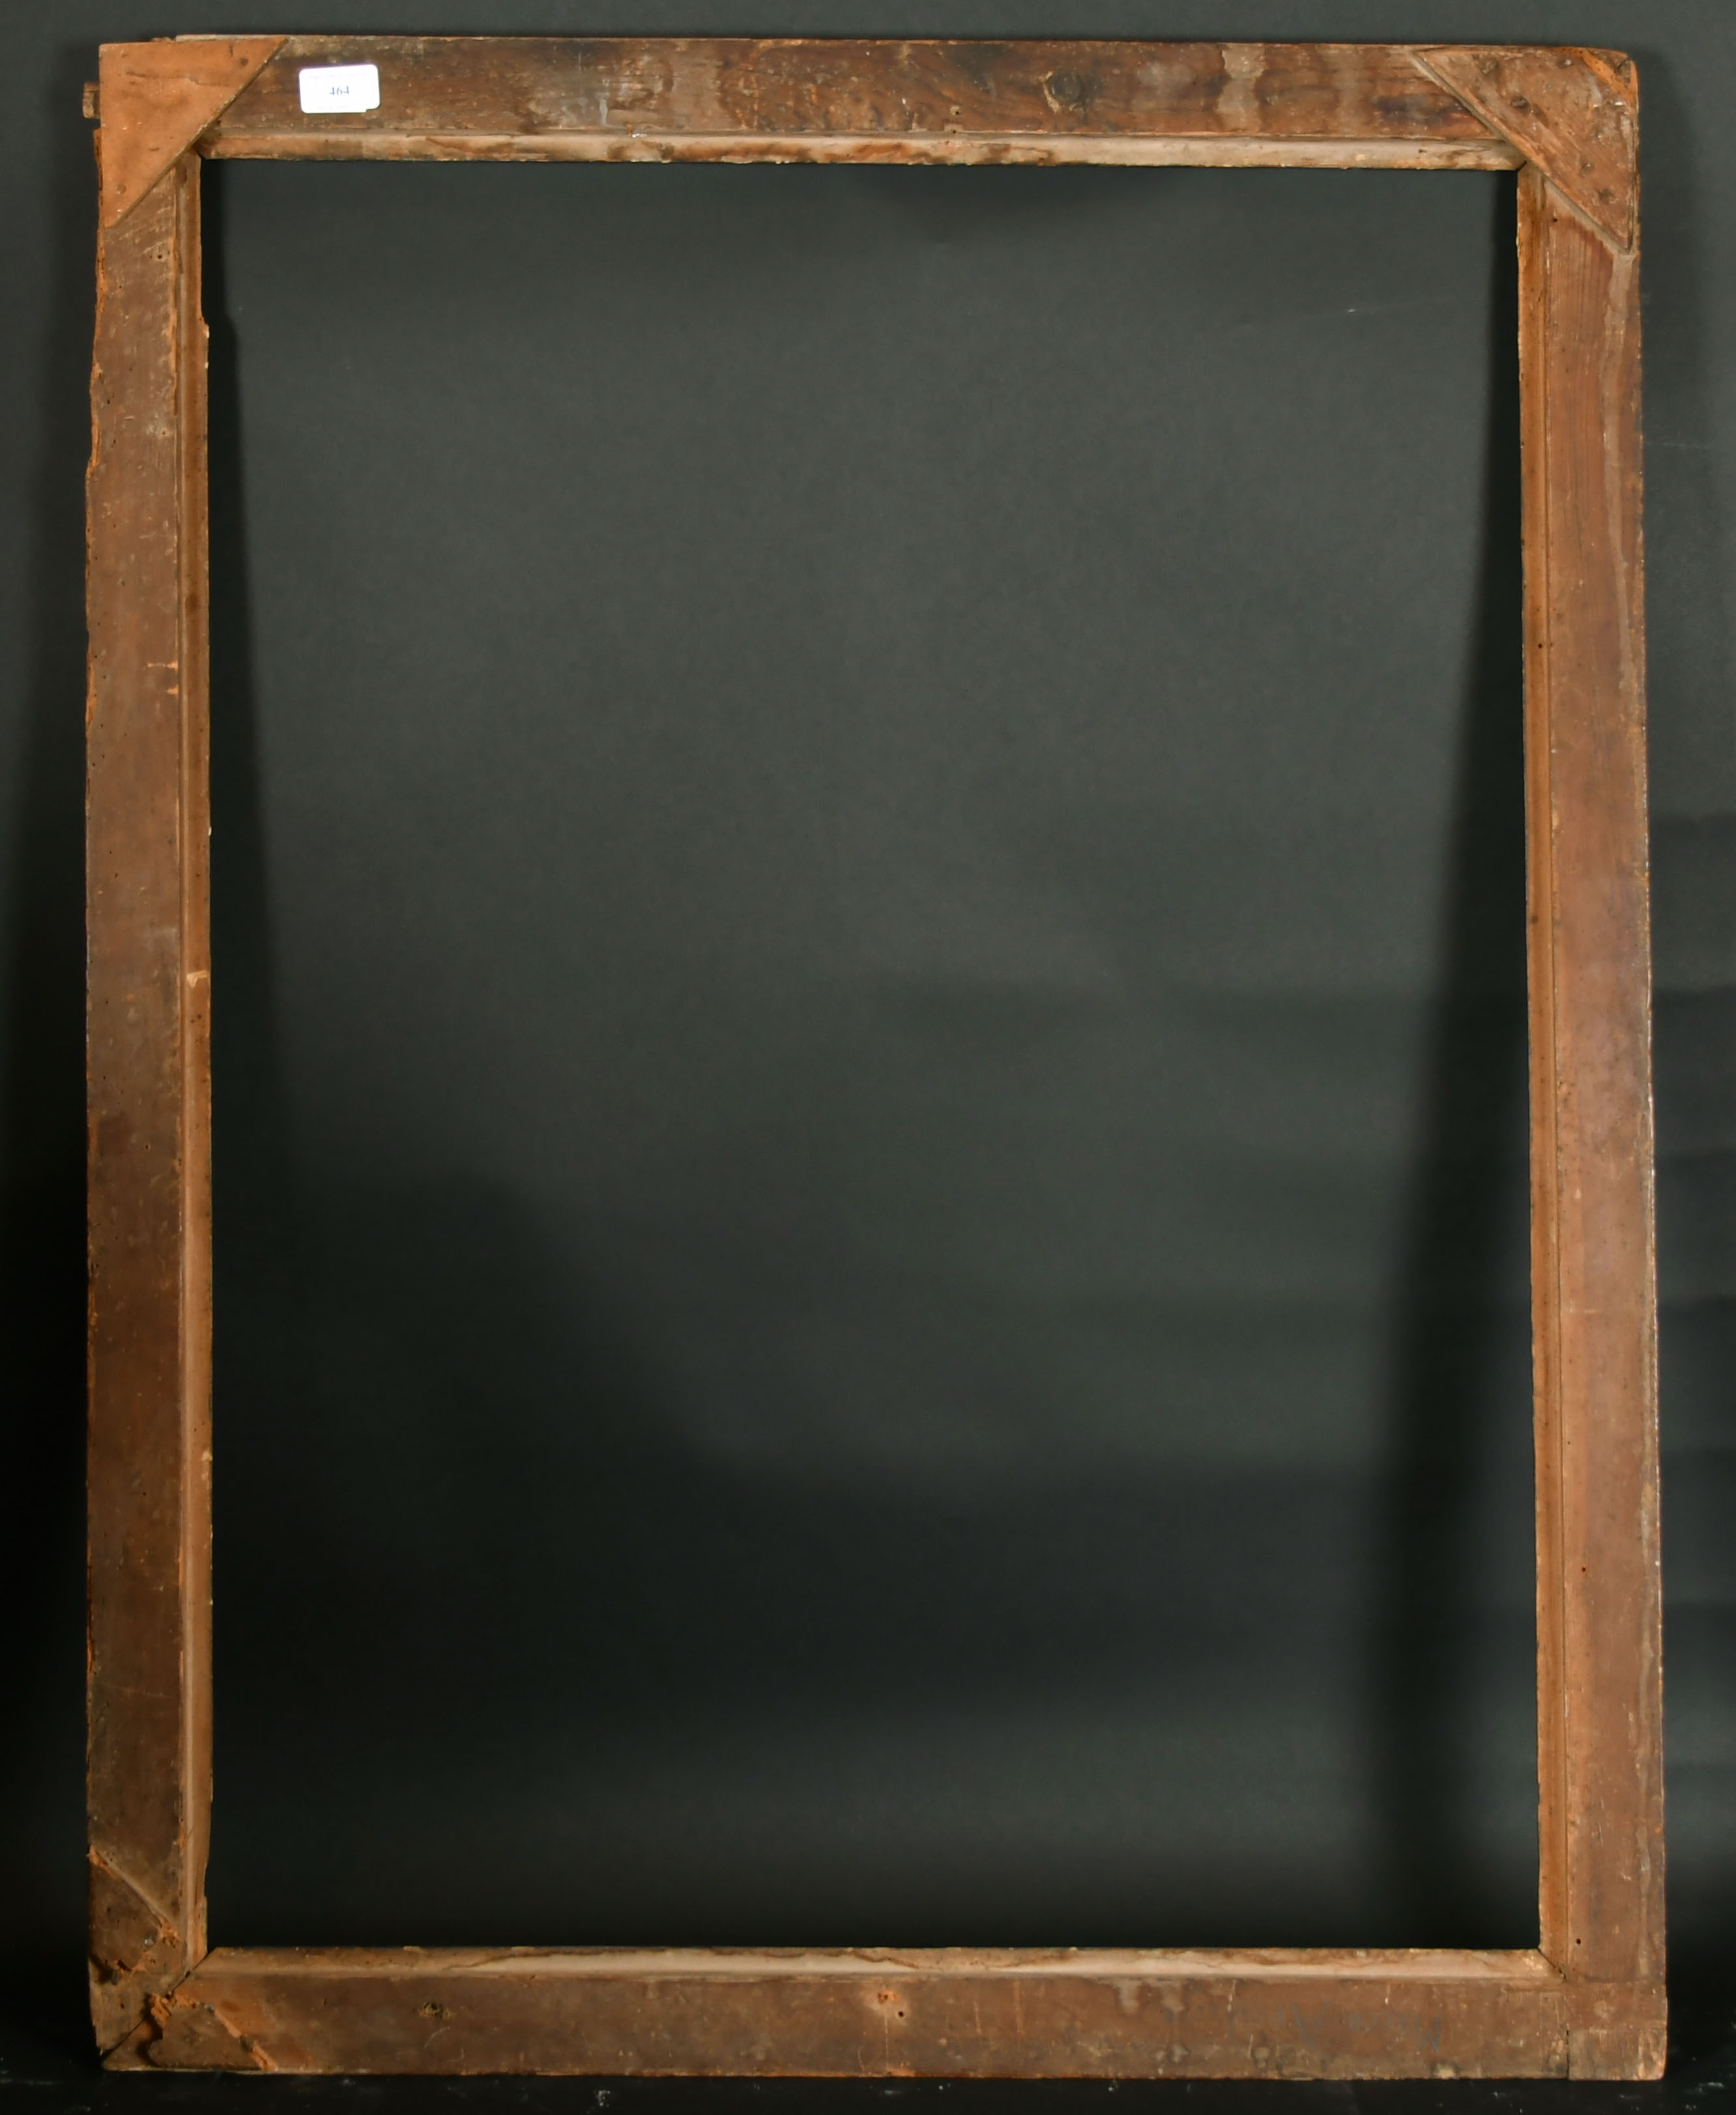 18th Century Italian School. A Gilt and Painted Frame, rebate 35.25" x 26" (89.5 x 66cm) - Image 3 of 3